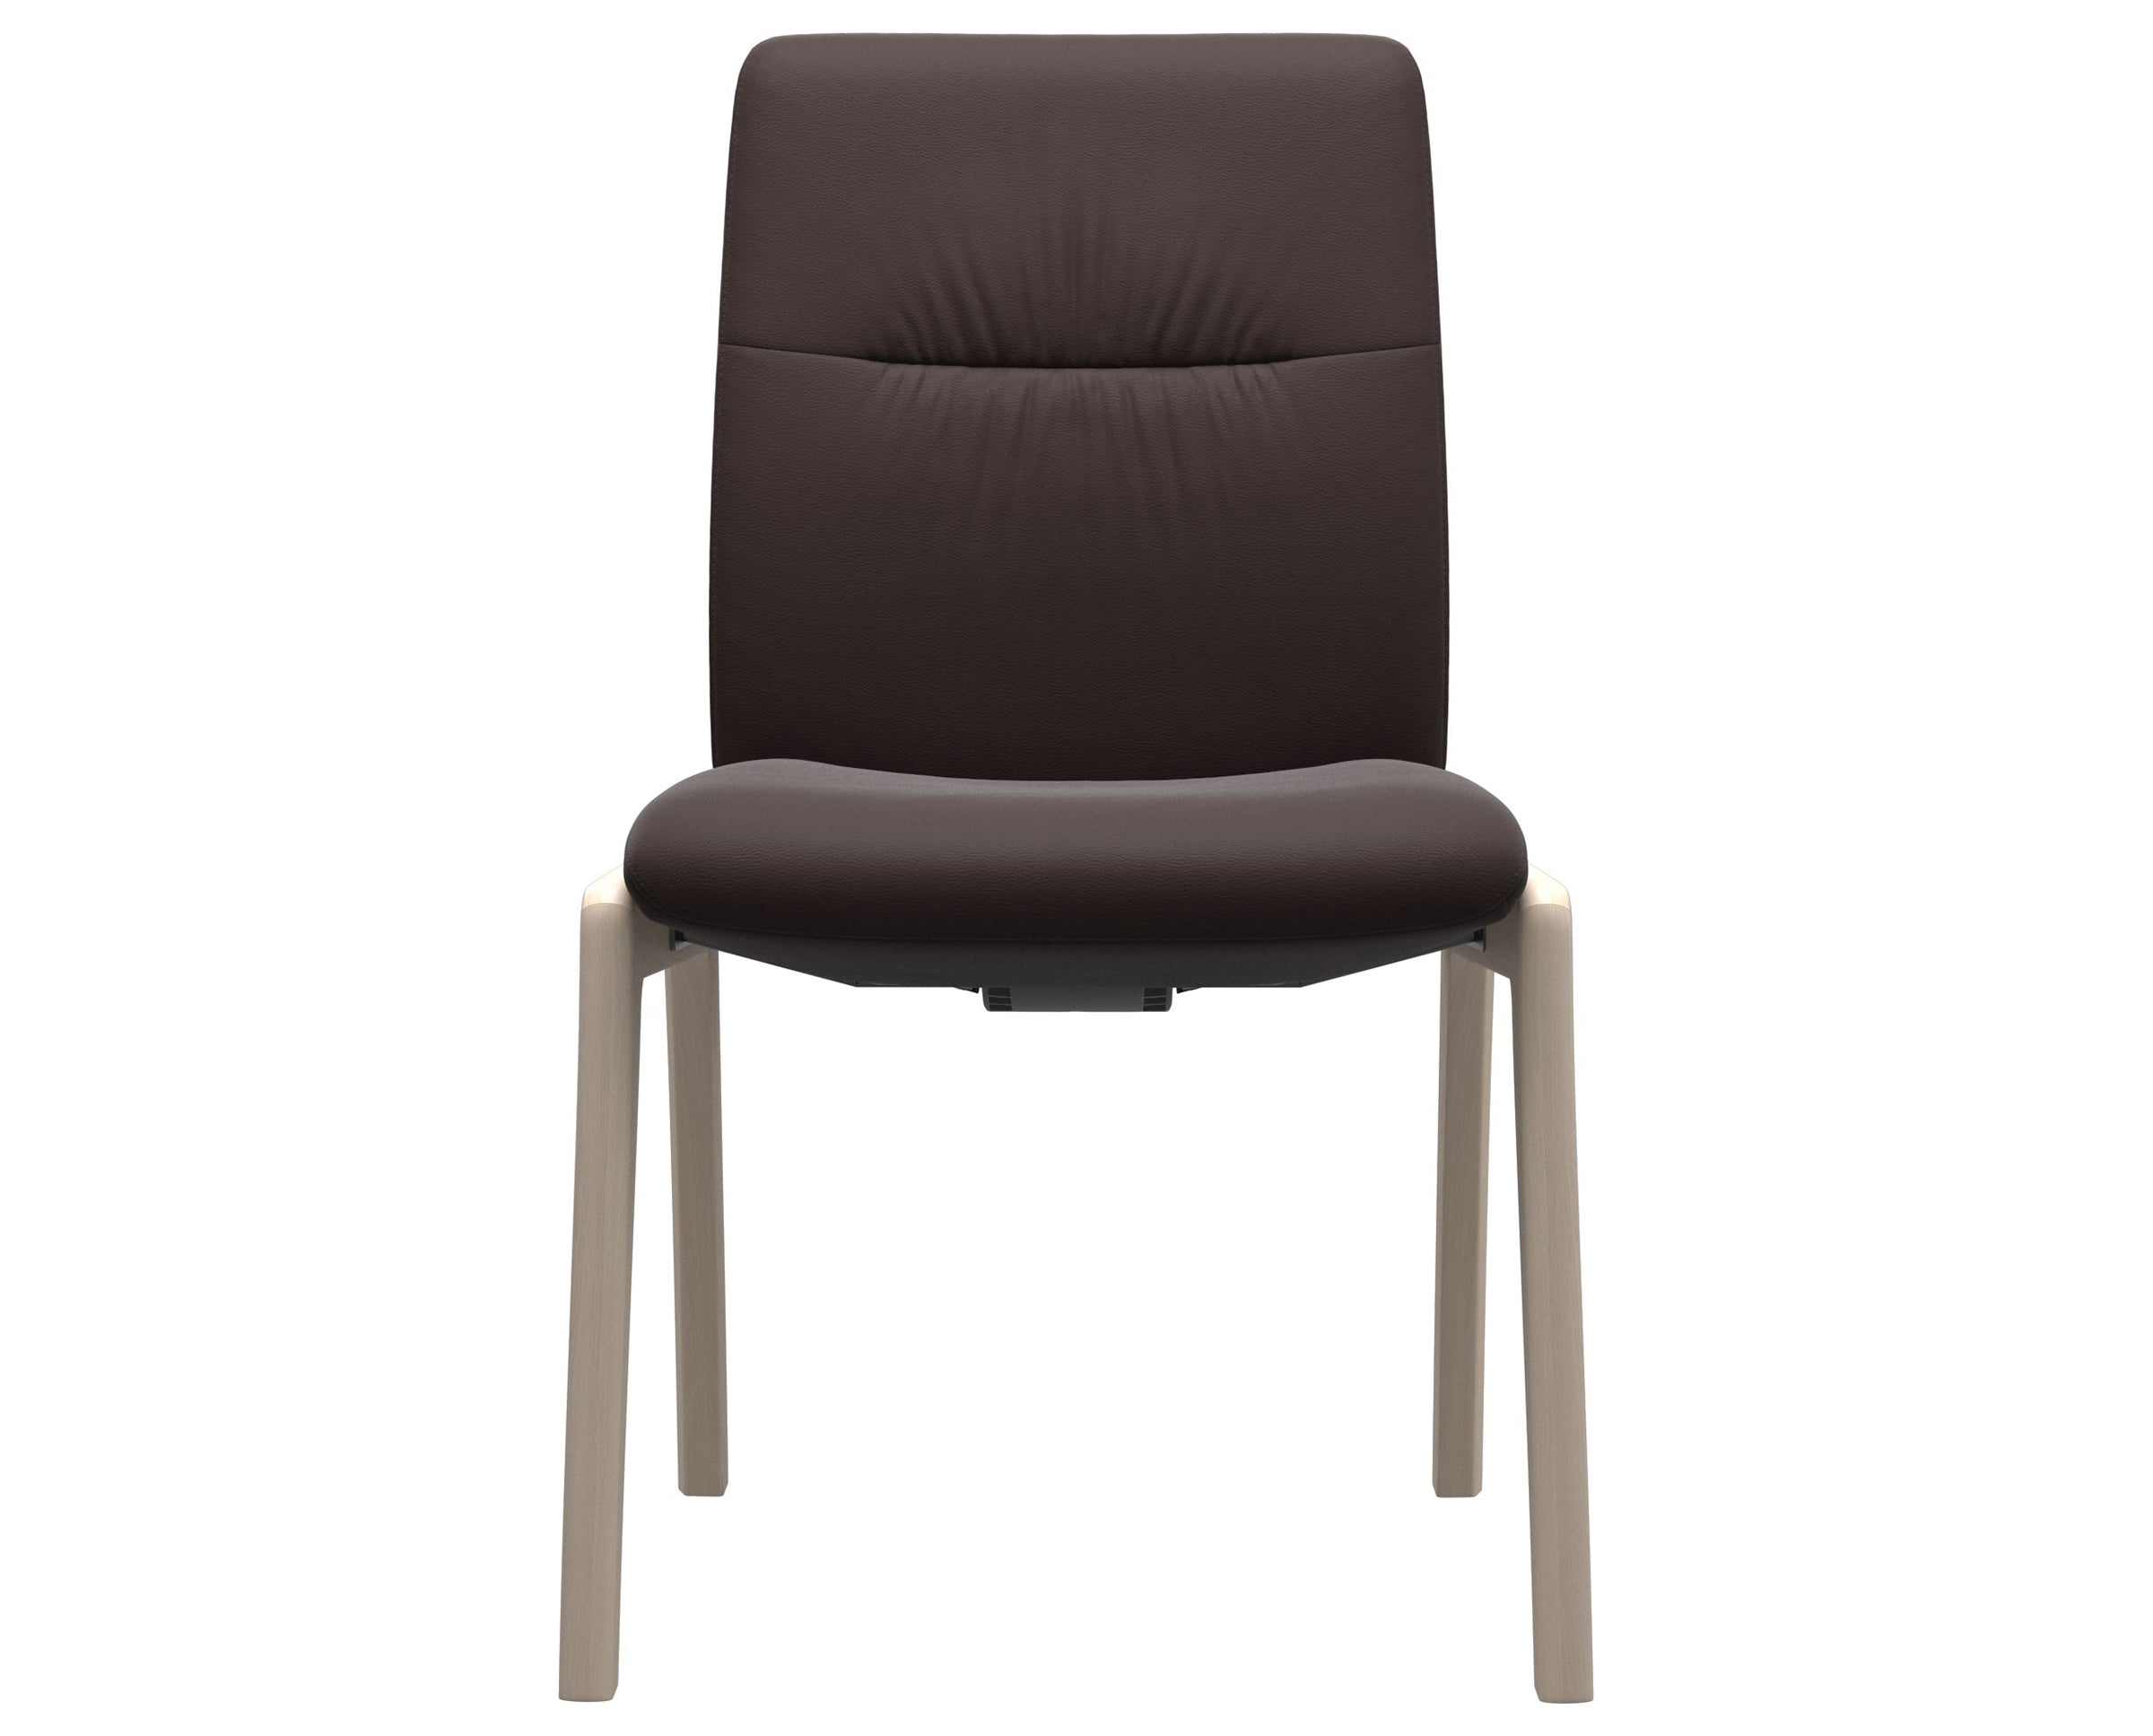 Paloma Leather Chocolate and Whitewash Base | Stressless Mint Low Back D100 Dining Chair | Valley Ridge Furniture